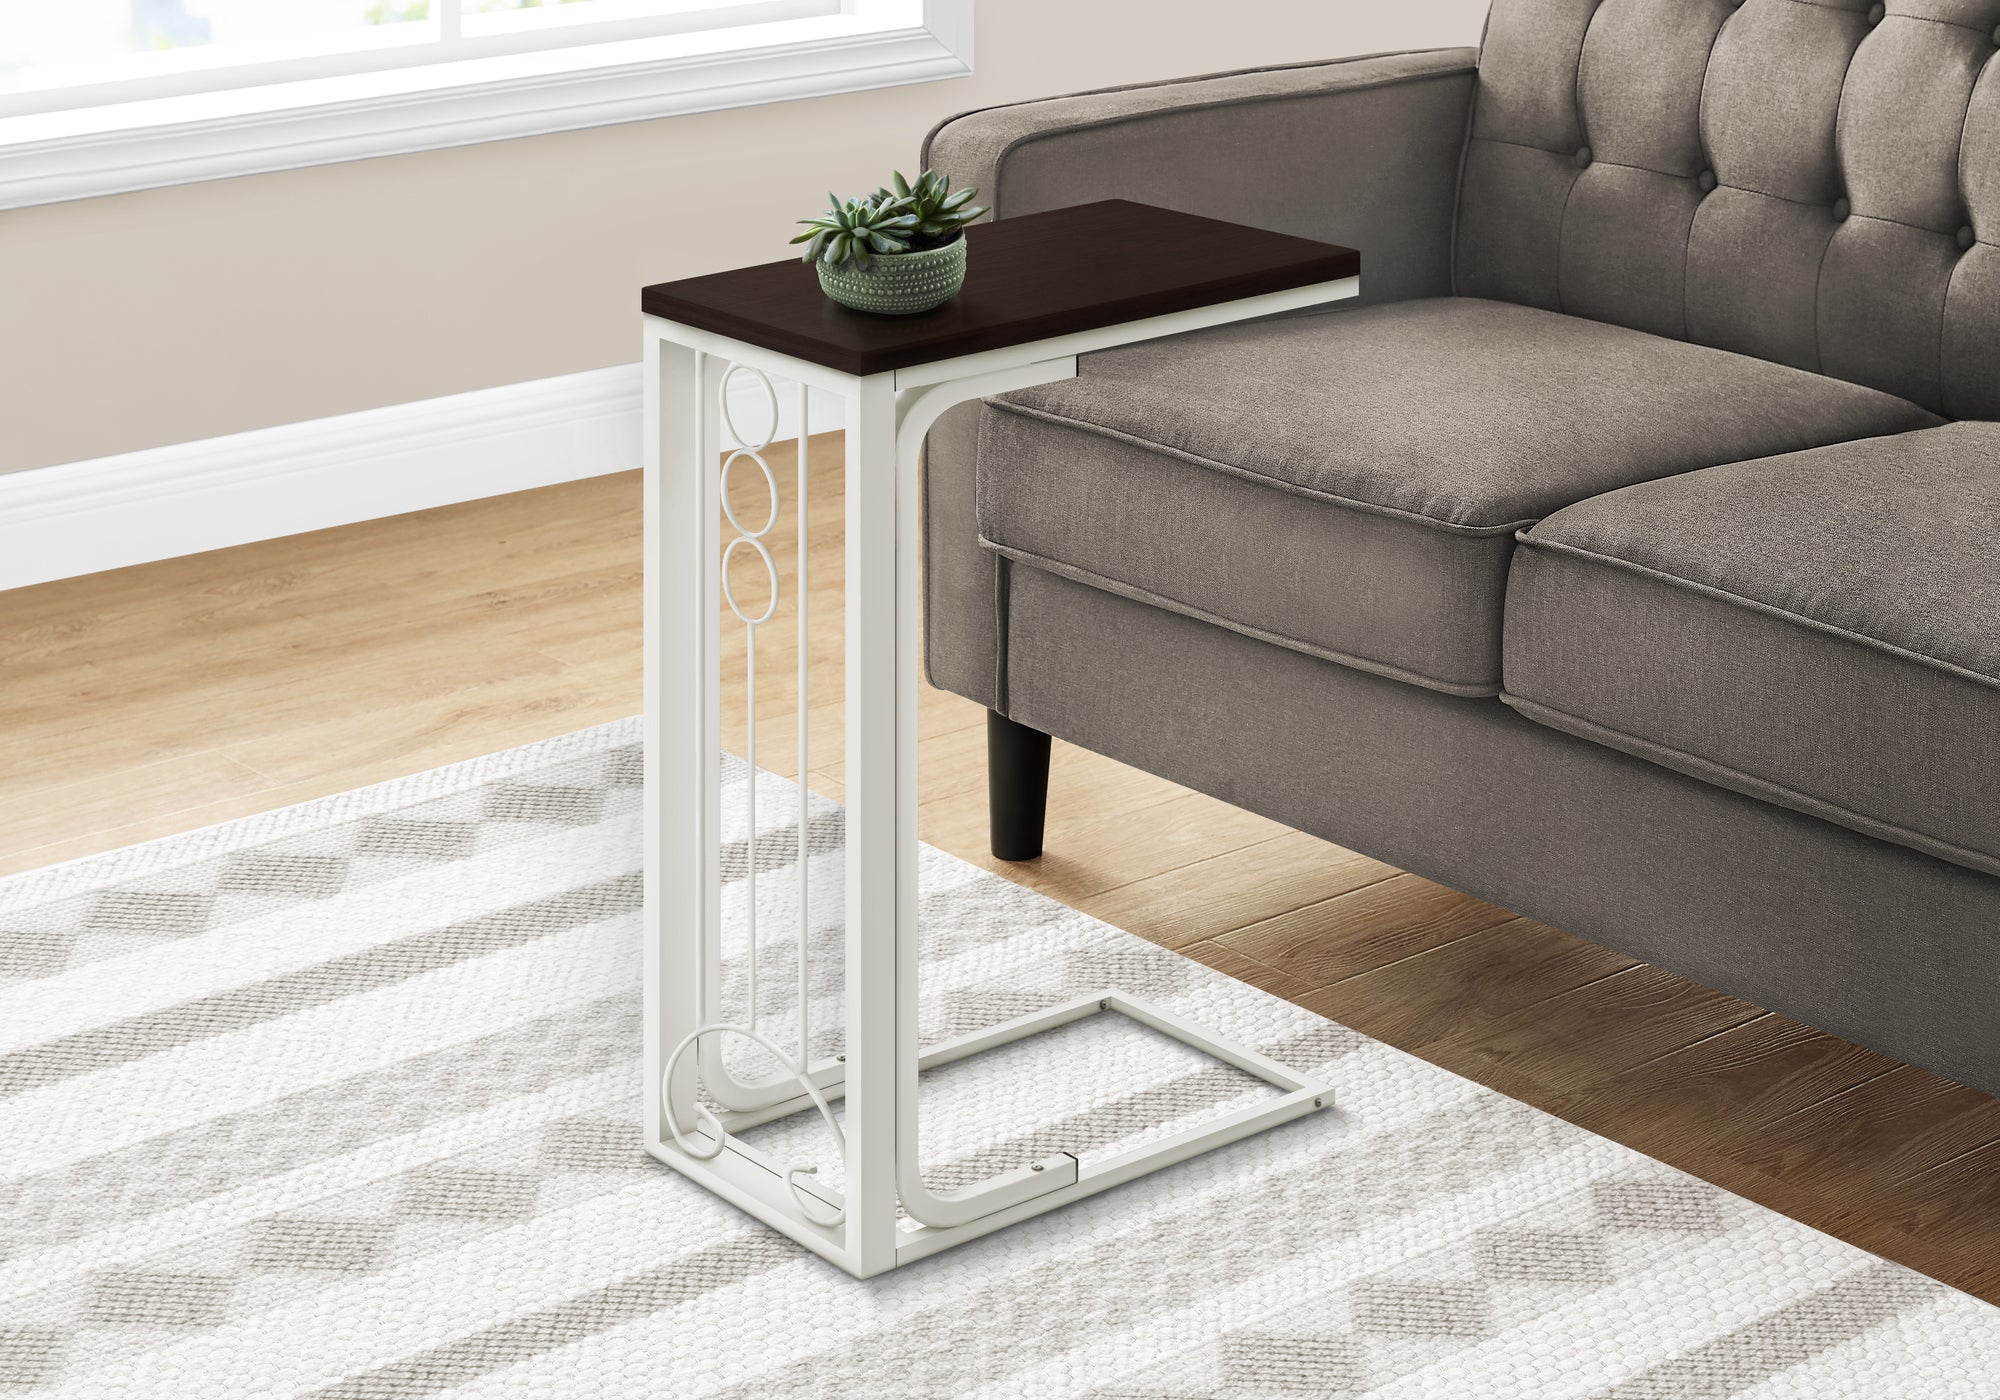 MN-413136    Accent Table, C-Shaped, End, Side, Snack, Living Room, Bedroom, Metal Legs, Laminate, Cherry, Silver, Contemporary, Modern